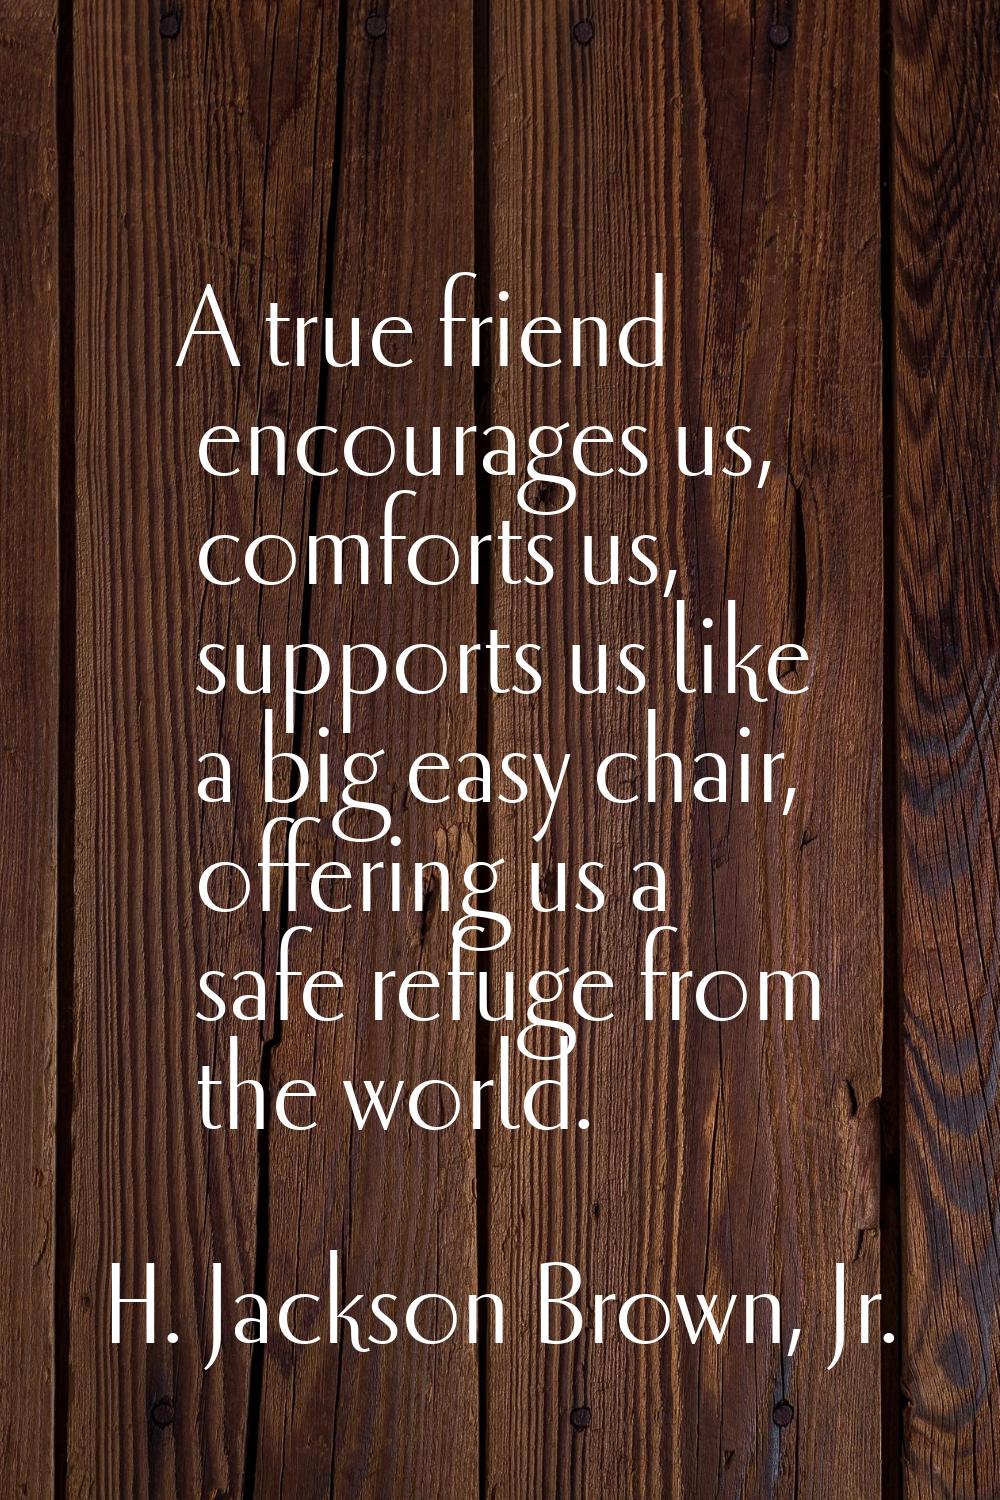 A true friend encourages us, comforts us, supports us like a big easy chair, offering us a safe ref